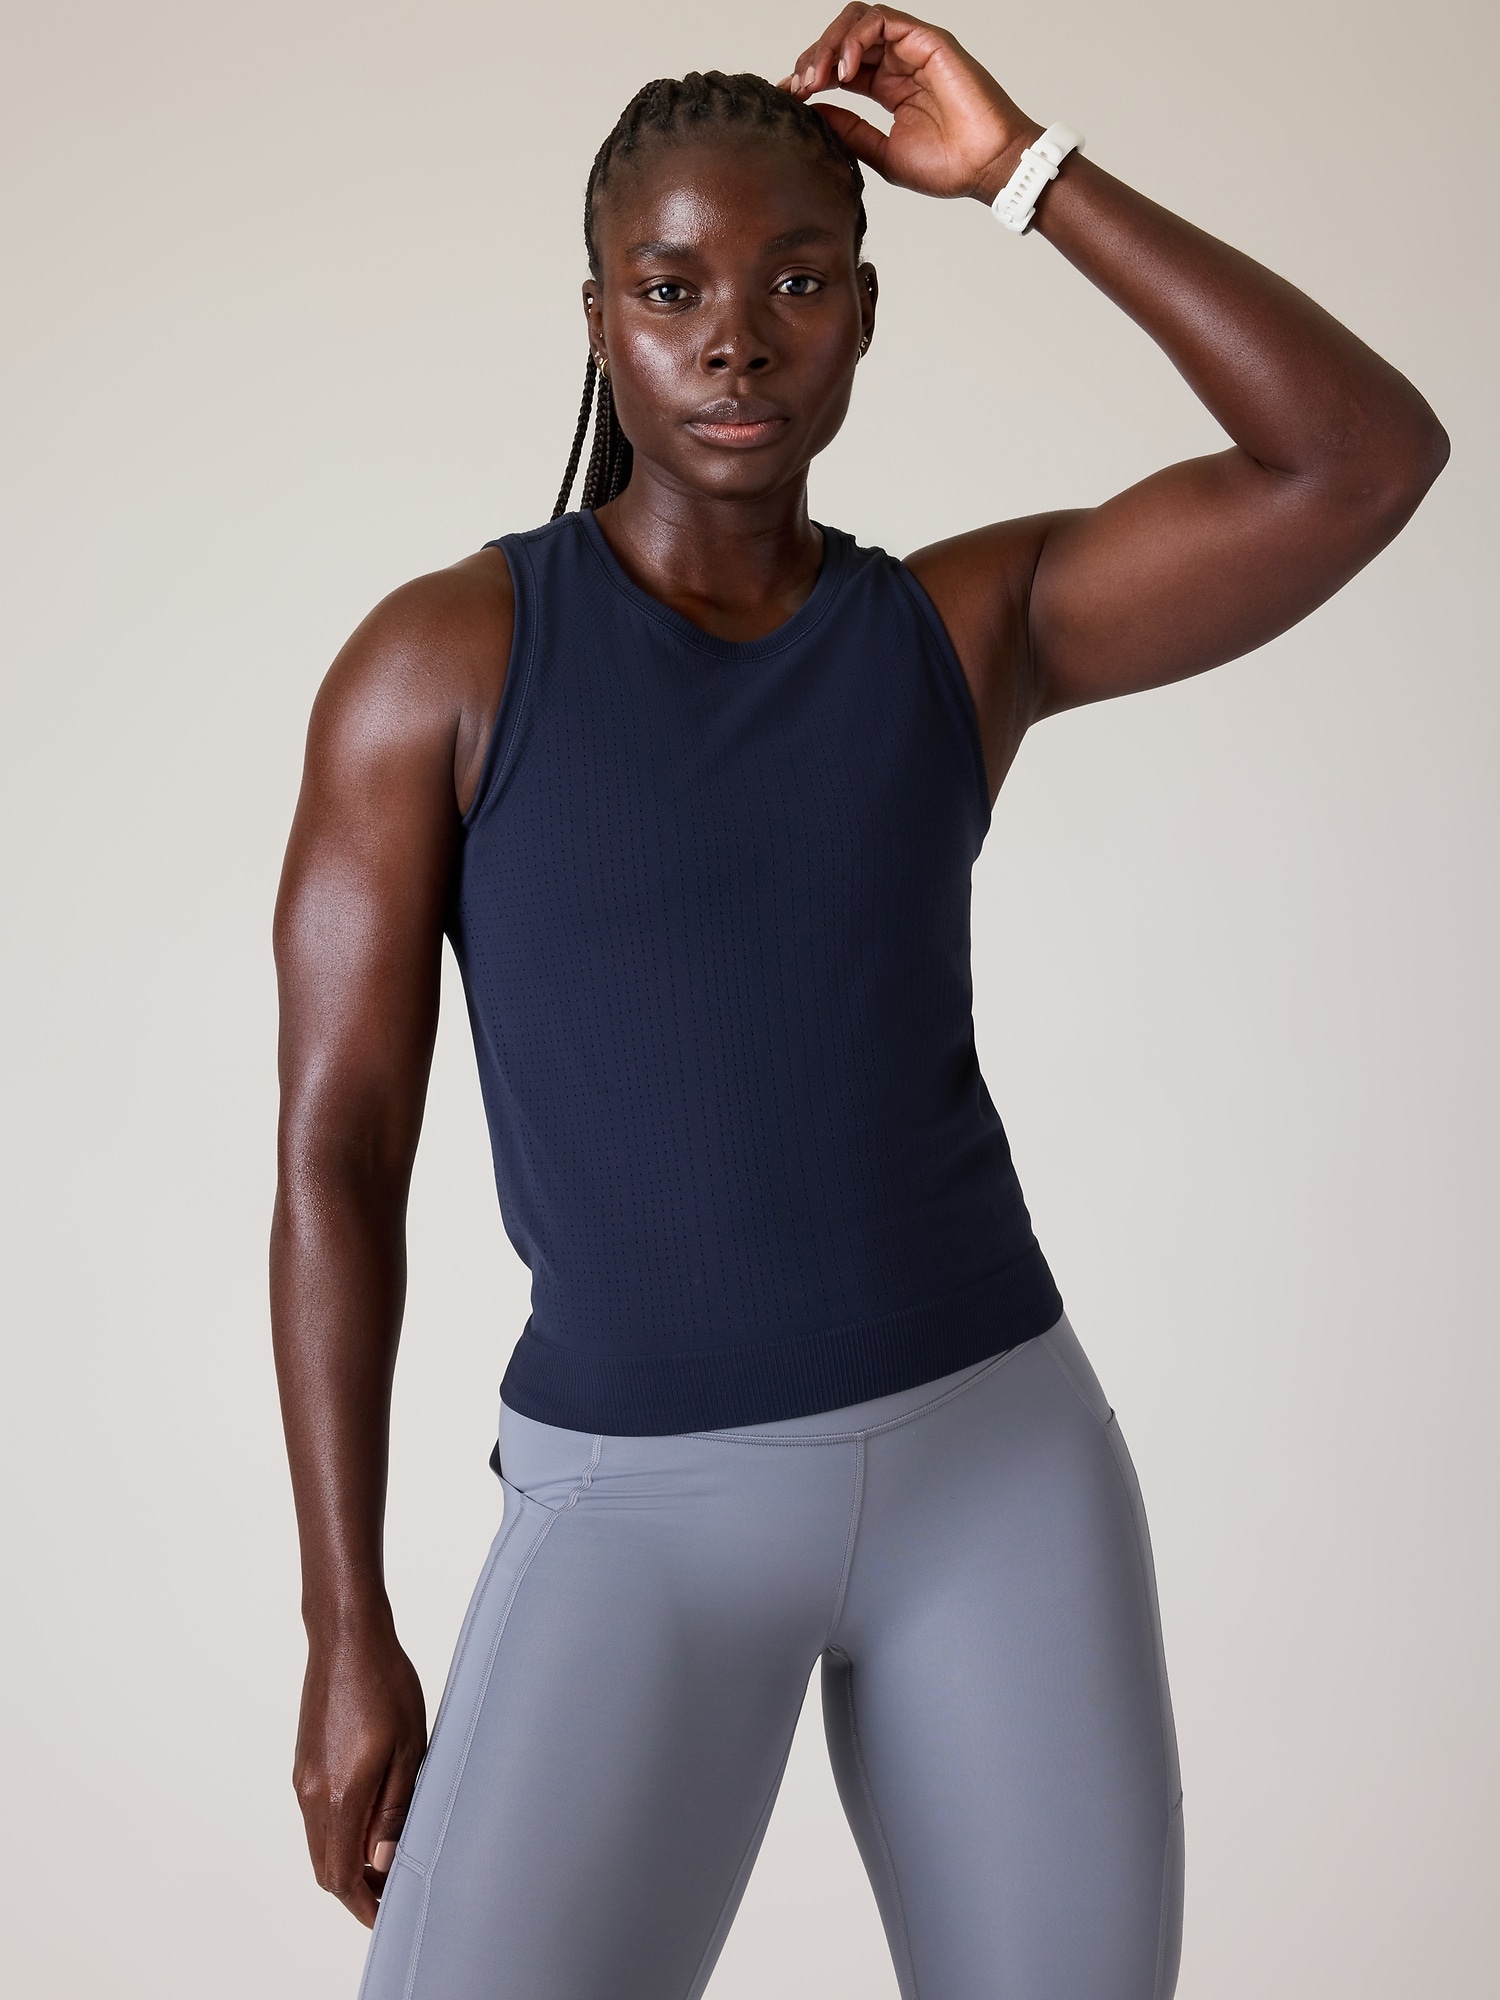 All In Motion Down Athletic Tank Tops for Women